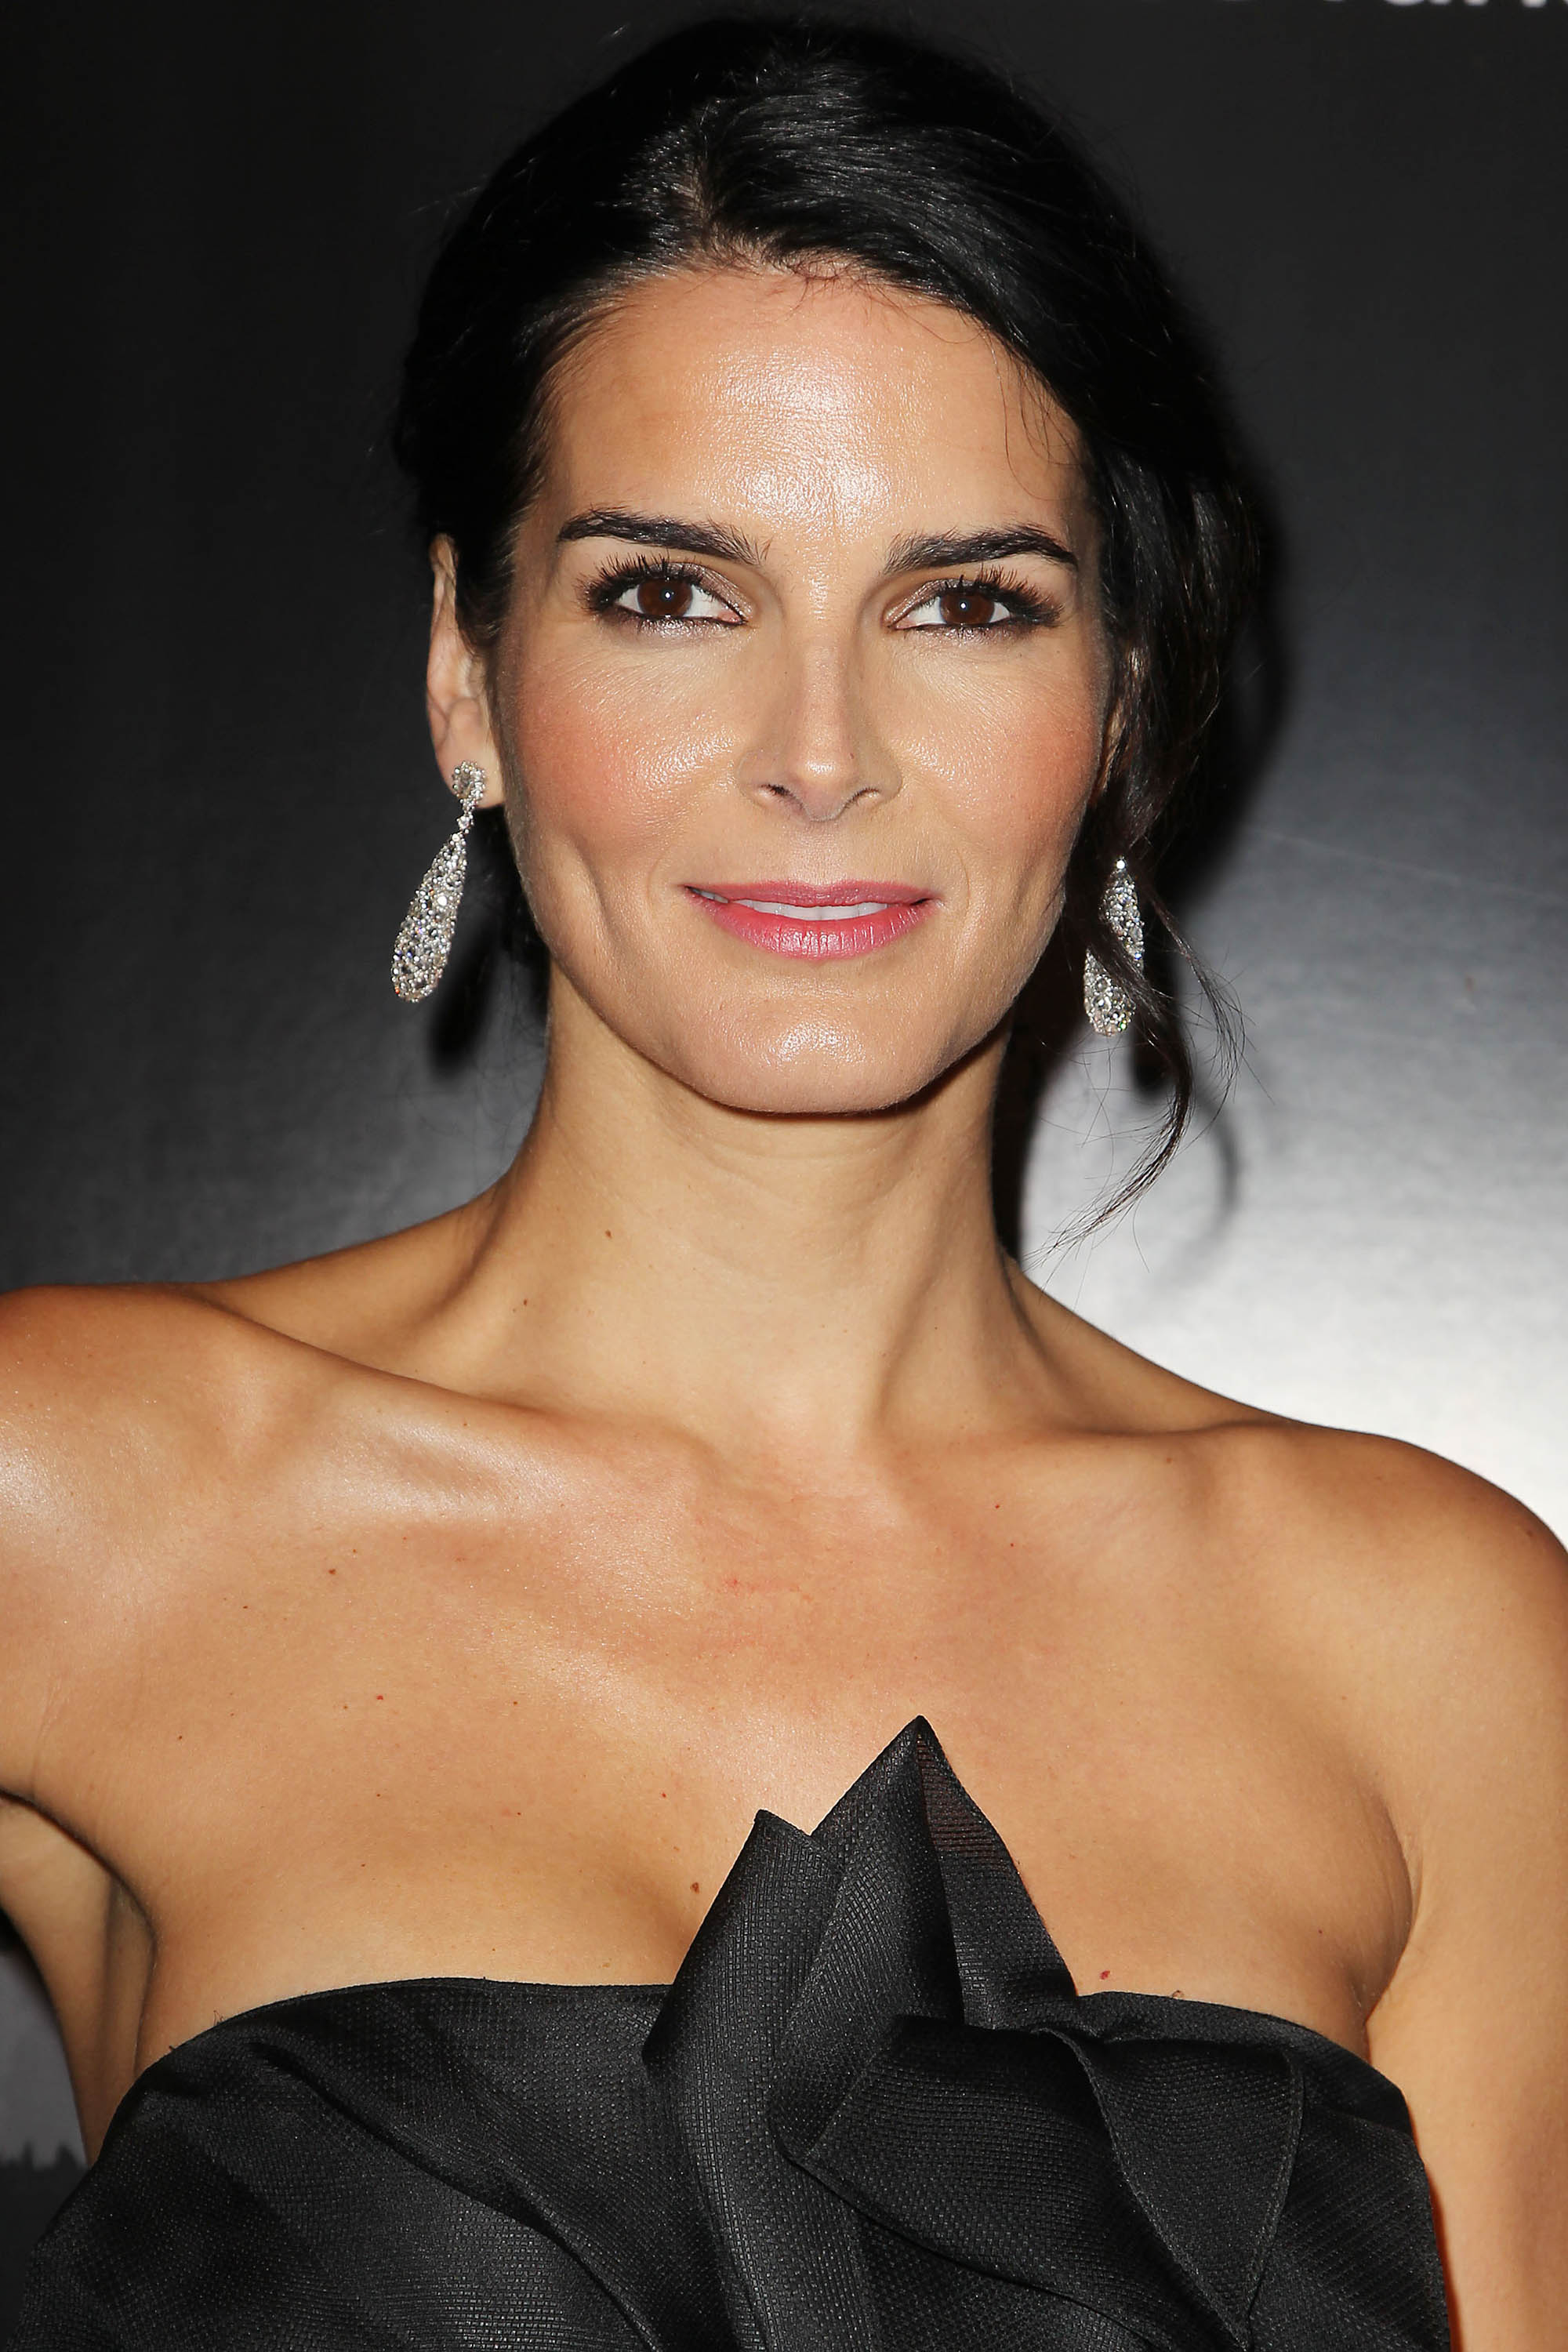 Angie_Harmon_--_Mix_Of_Events_024.jpg